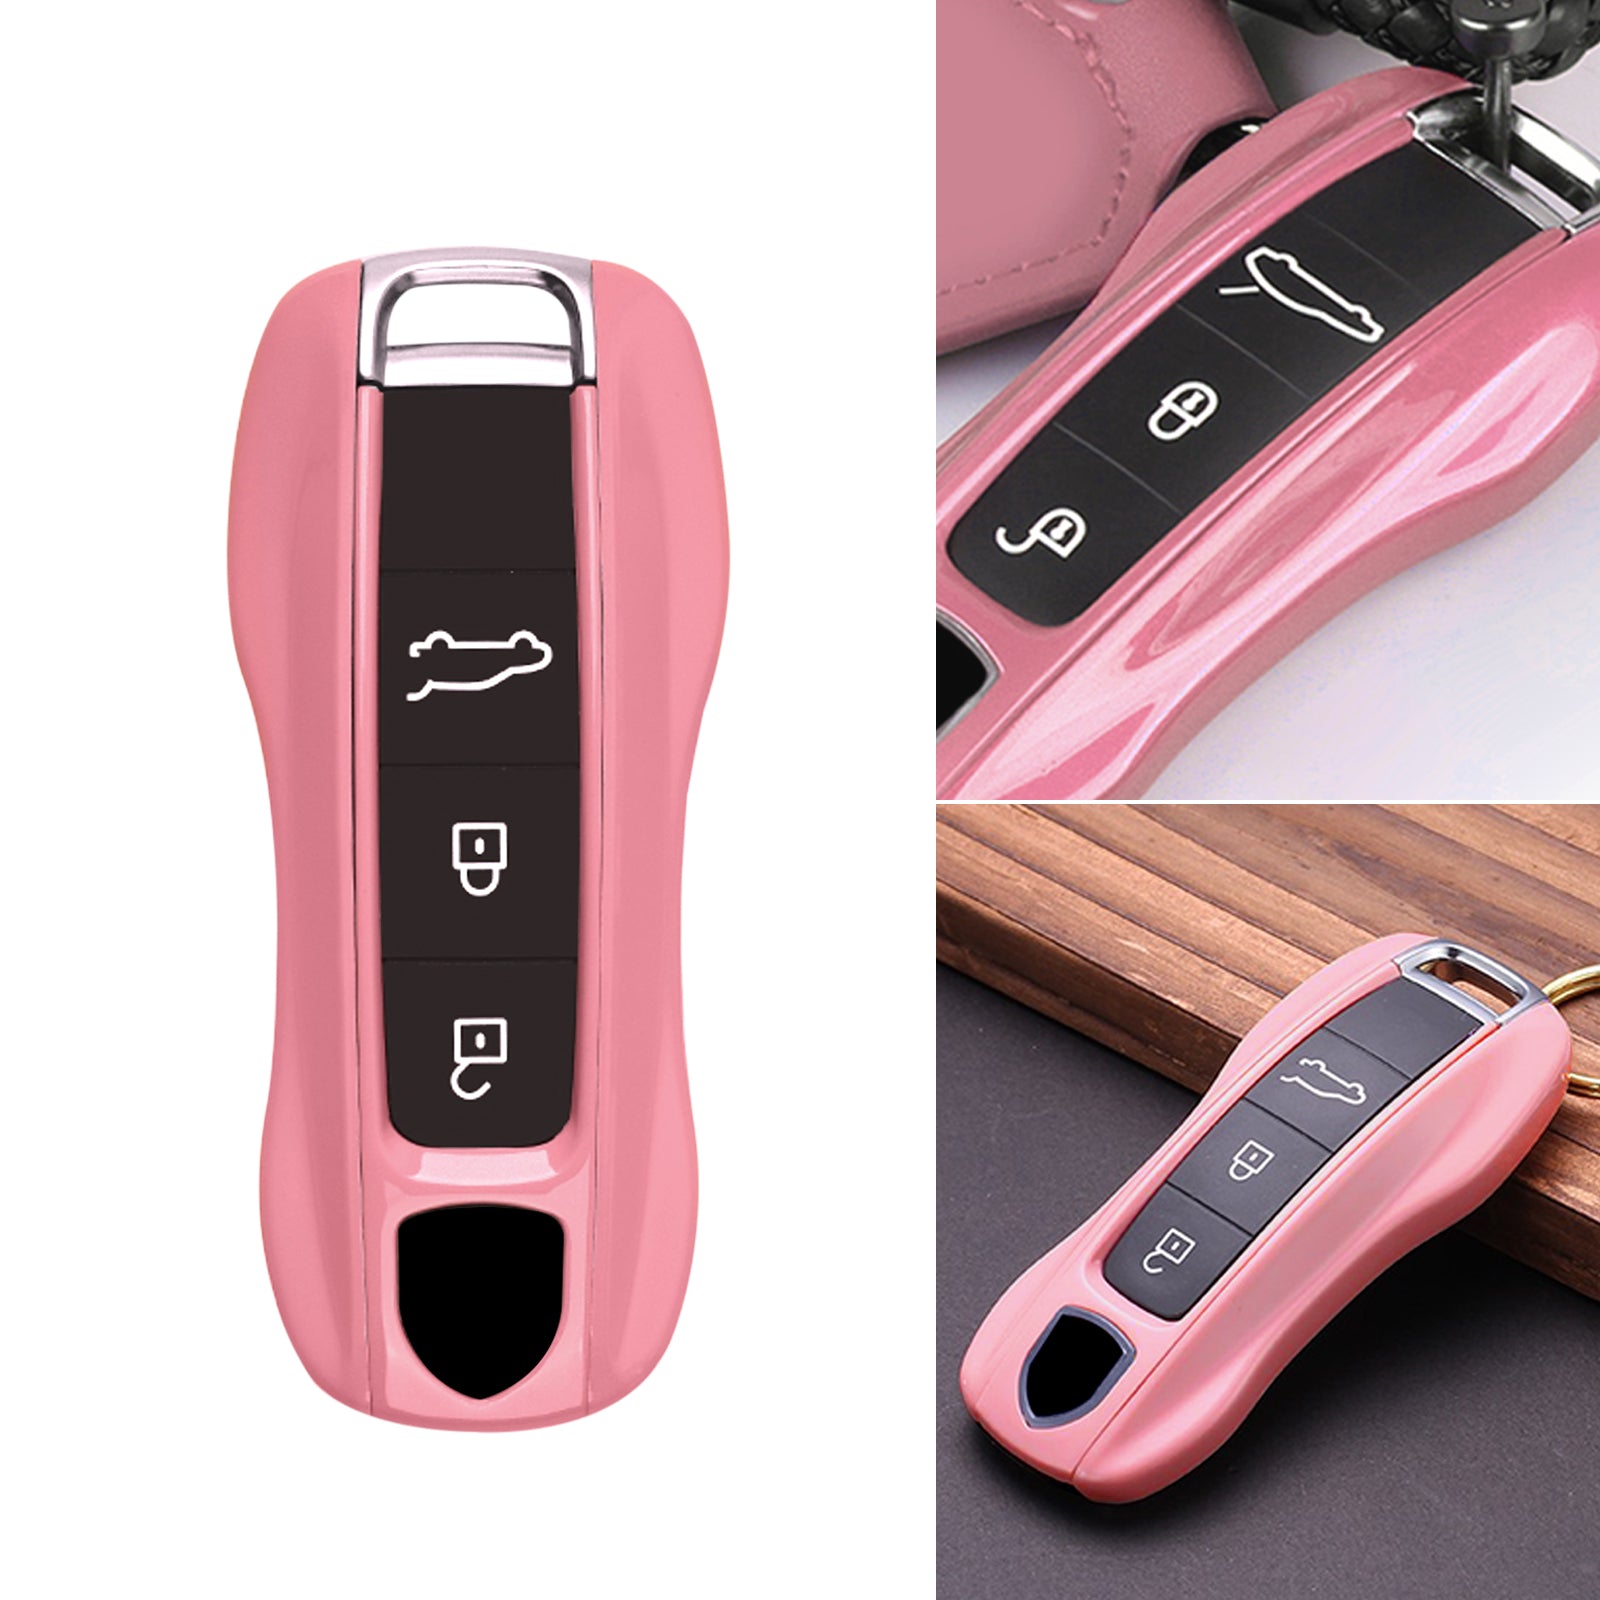 1set Keychain & Car Key Cover Compatible With Toyota, Key Fob Cover